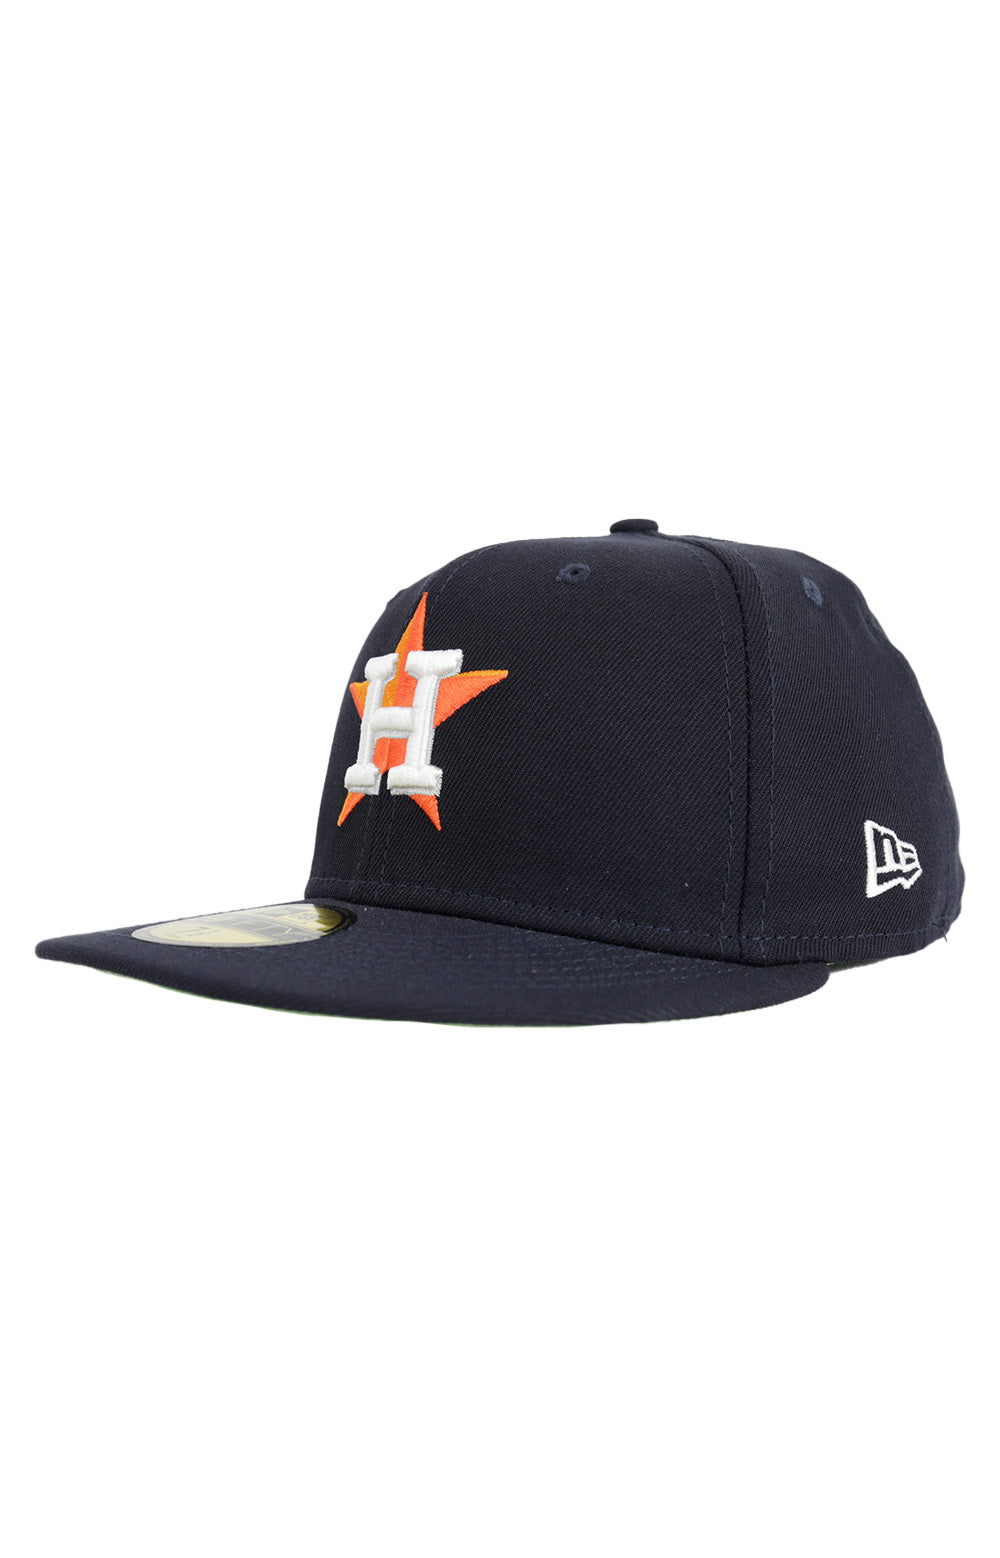 Houston Astros Citrus Pop 59FIFTY Fitted Hat